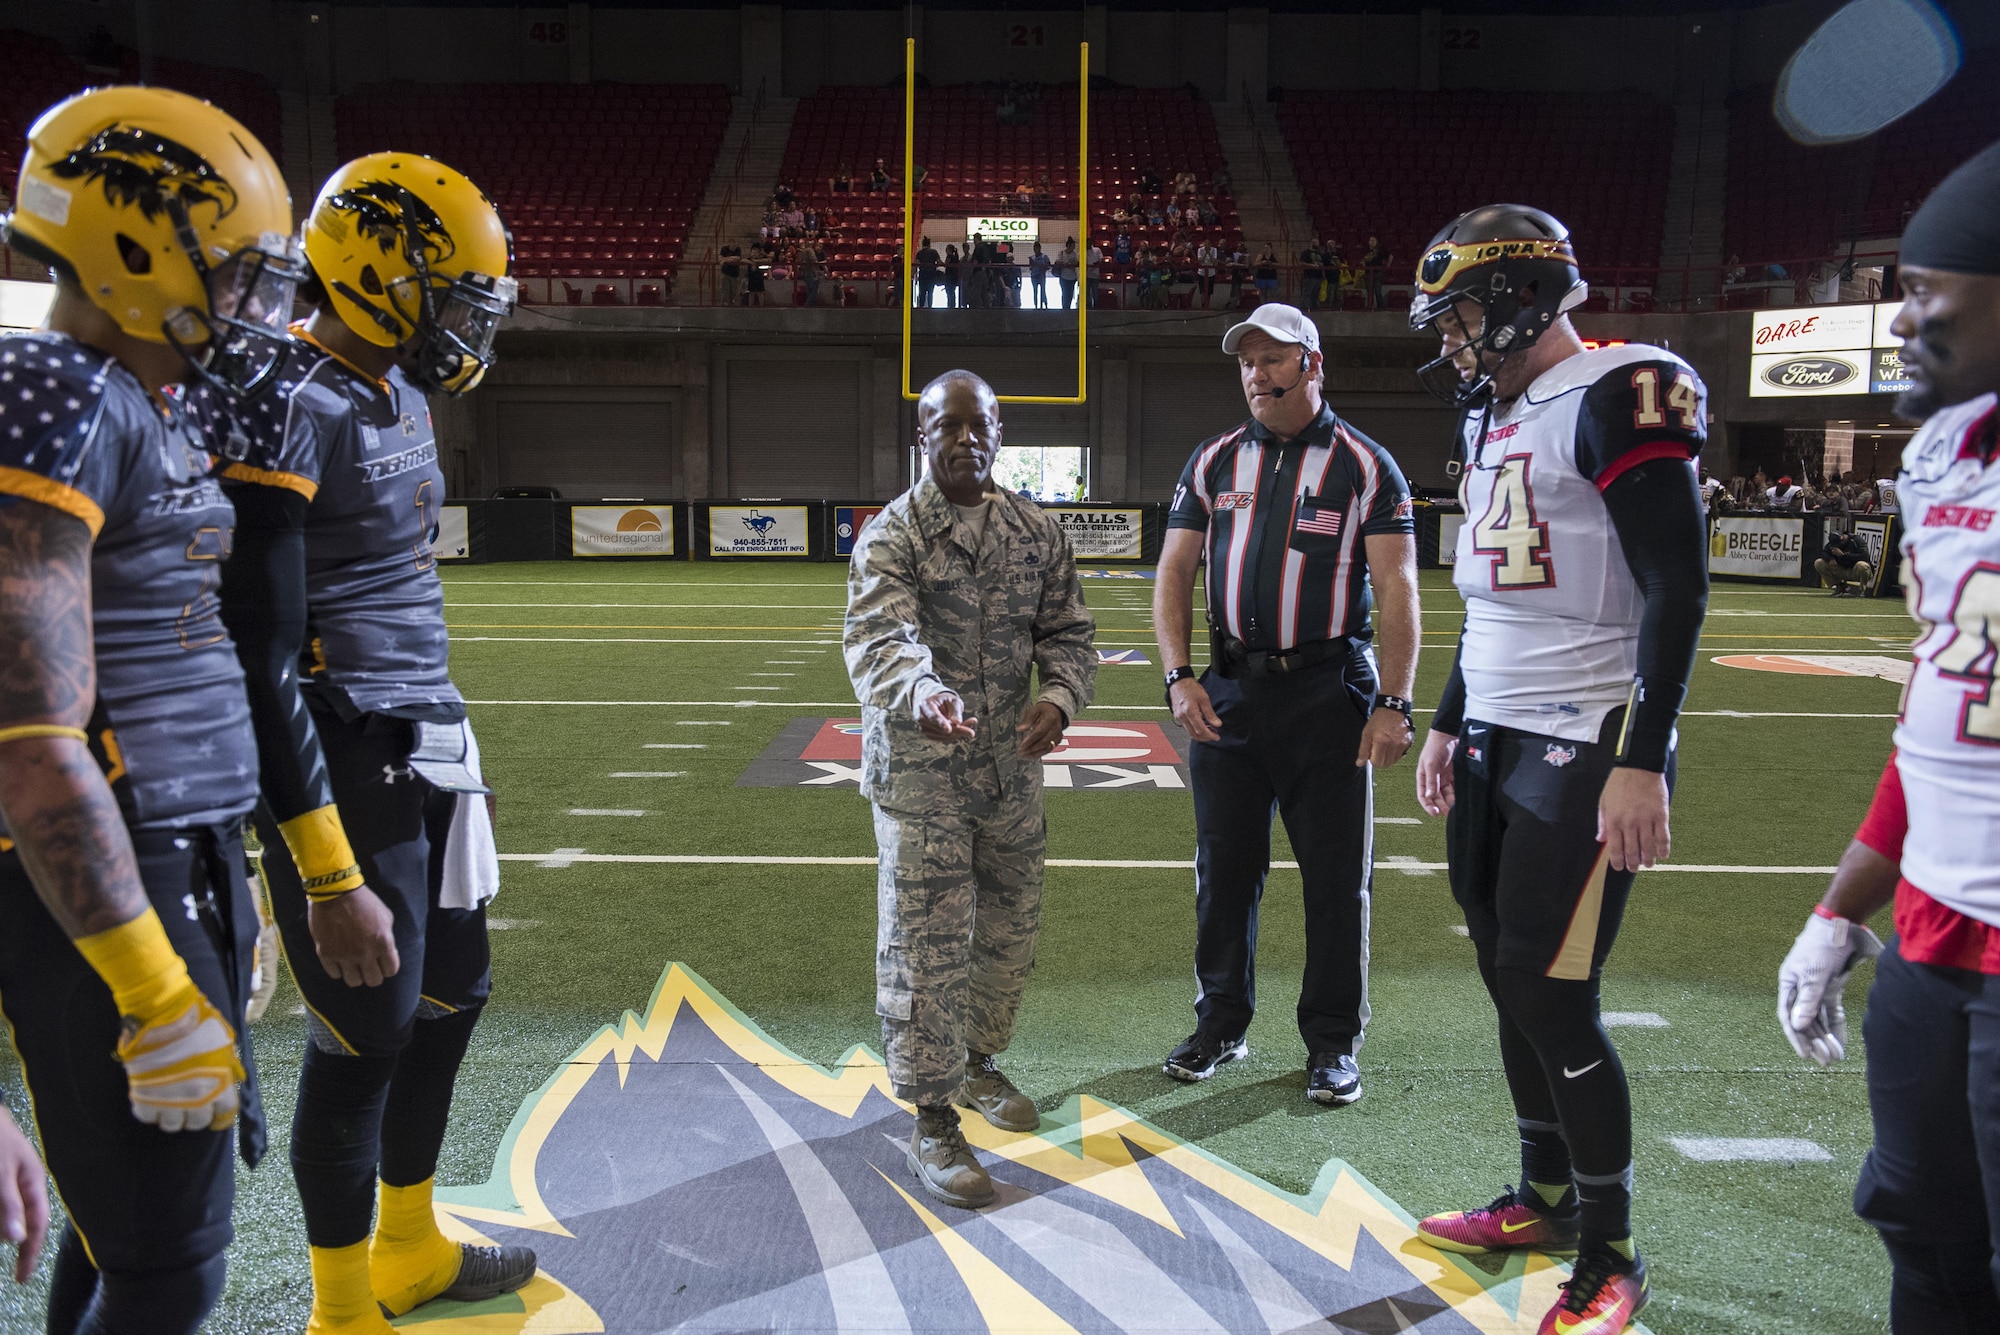 Brig. Gen. Ronald Jolly Sr., 82nd Training Wing commander, tosses the game coin for the Nighthawks military appreciation game who played against the Iowa Barnstormers at the Kay Yeager Coliseum in downtown Wichita Falls, Texas, May 20, 2017. The Nighthawks won the coin toss and started the game. (U.S. Air Force photo by Staff Sgt. Kyle E. Gese)